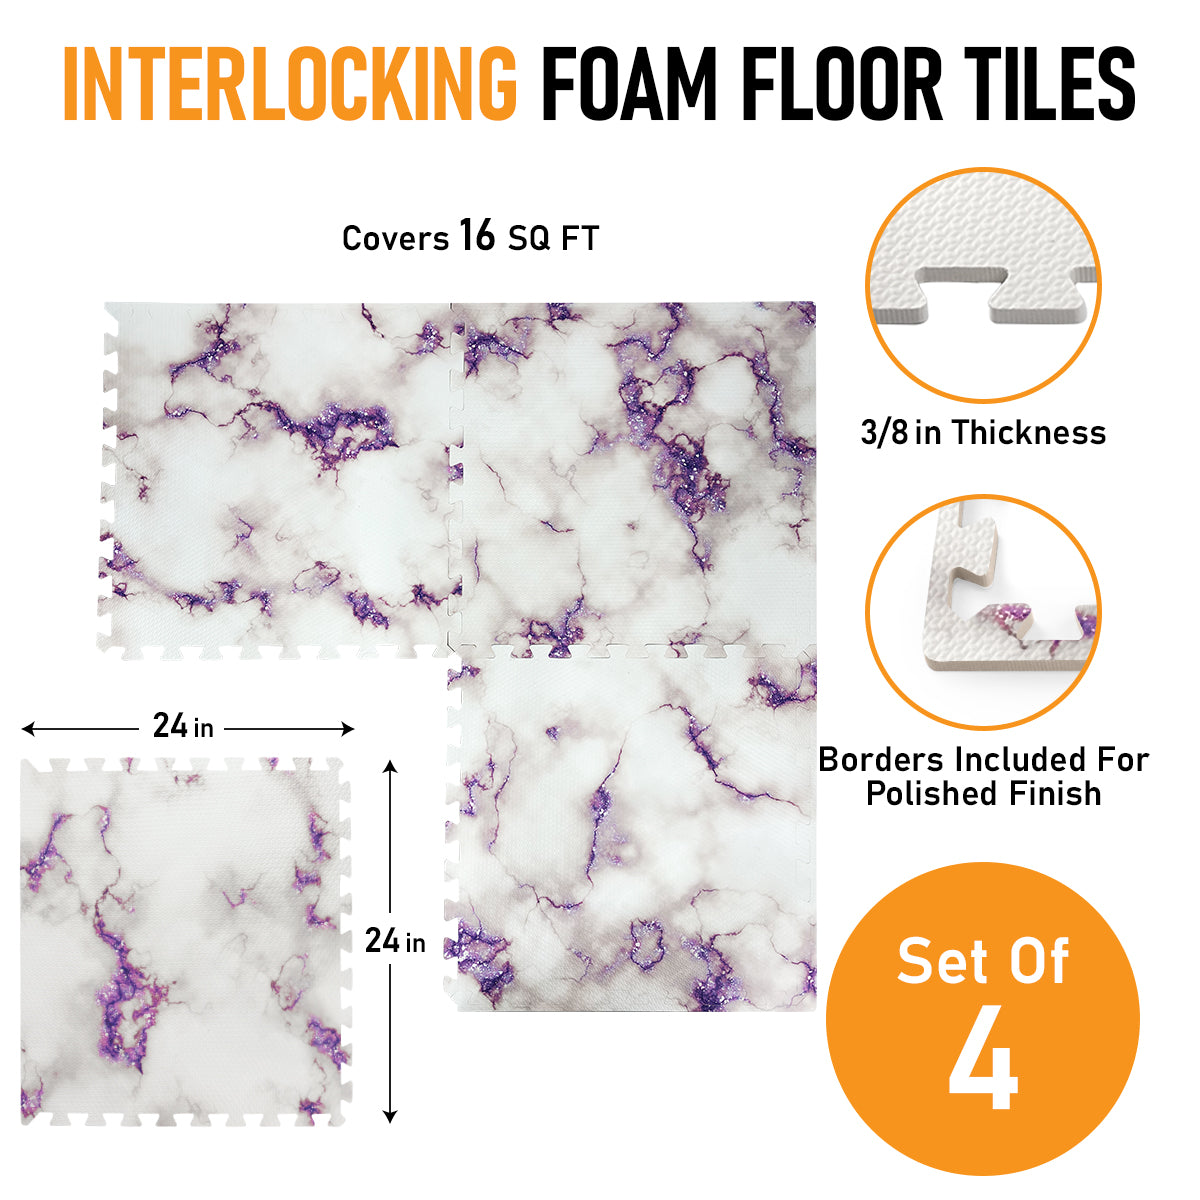 3/8 Inch Thick Interlocking Marble Foam Floor Tiles for Home, Office, Workout Equipment Space, Commercial Areas, Anti-Fatigue Flooring Padding 24x24 in., Purple Marble